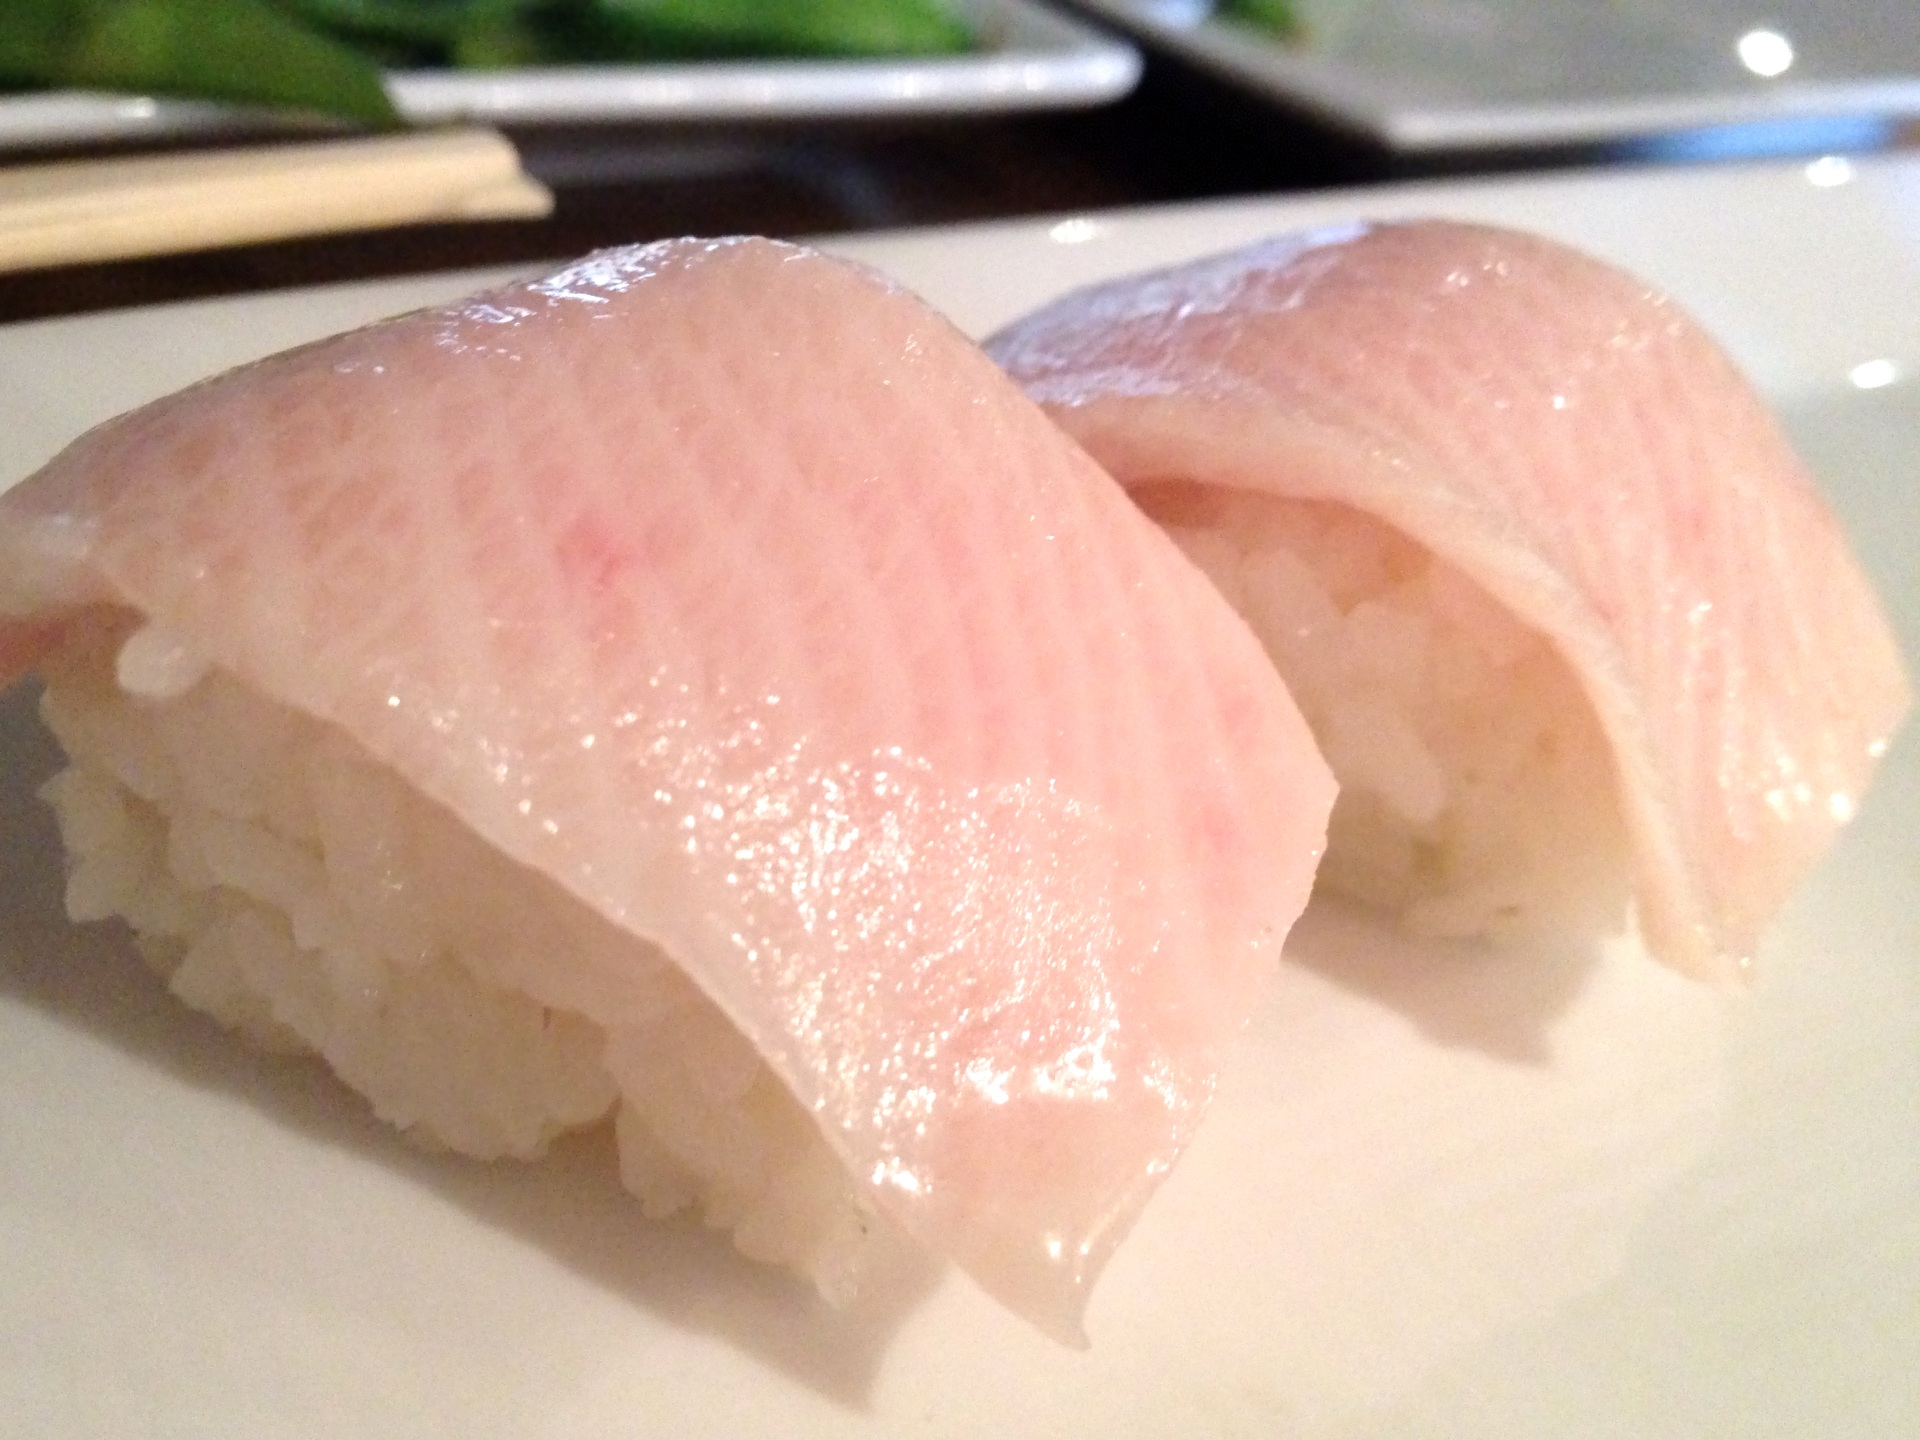 SUGARFISH’s Still Not My Style, But Much Better Second Chance